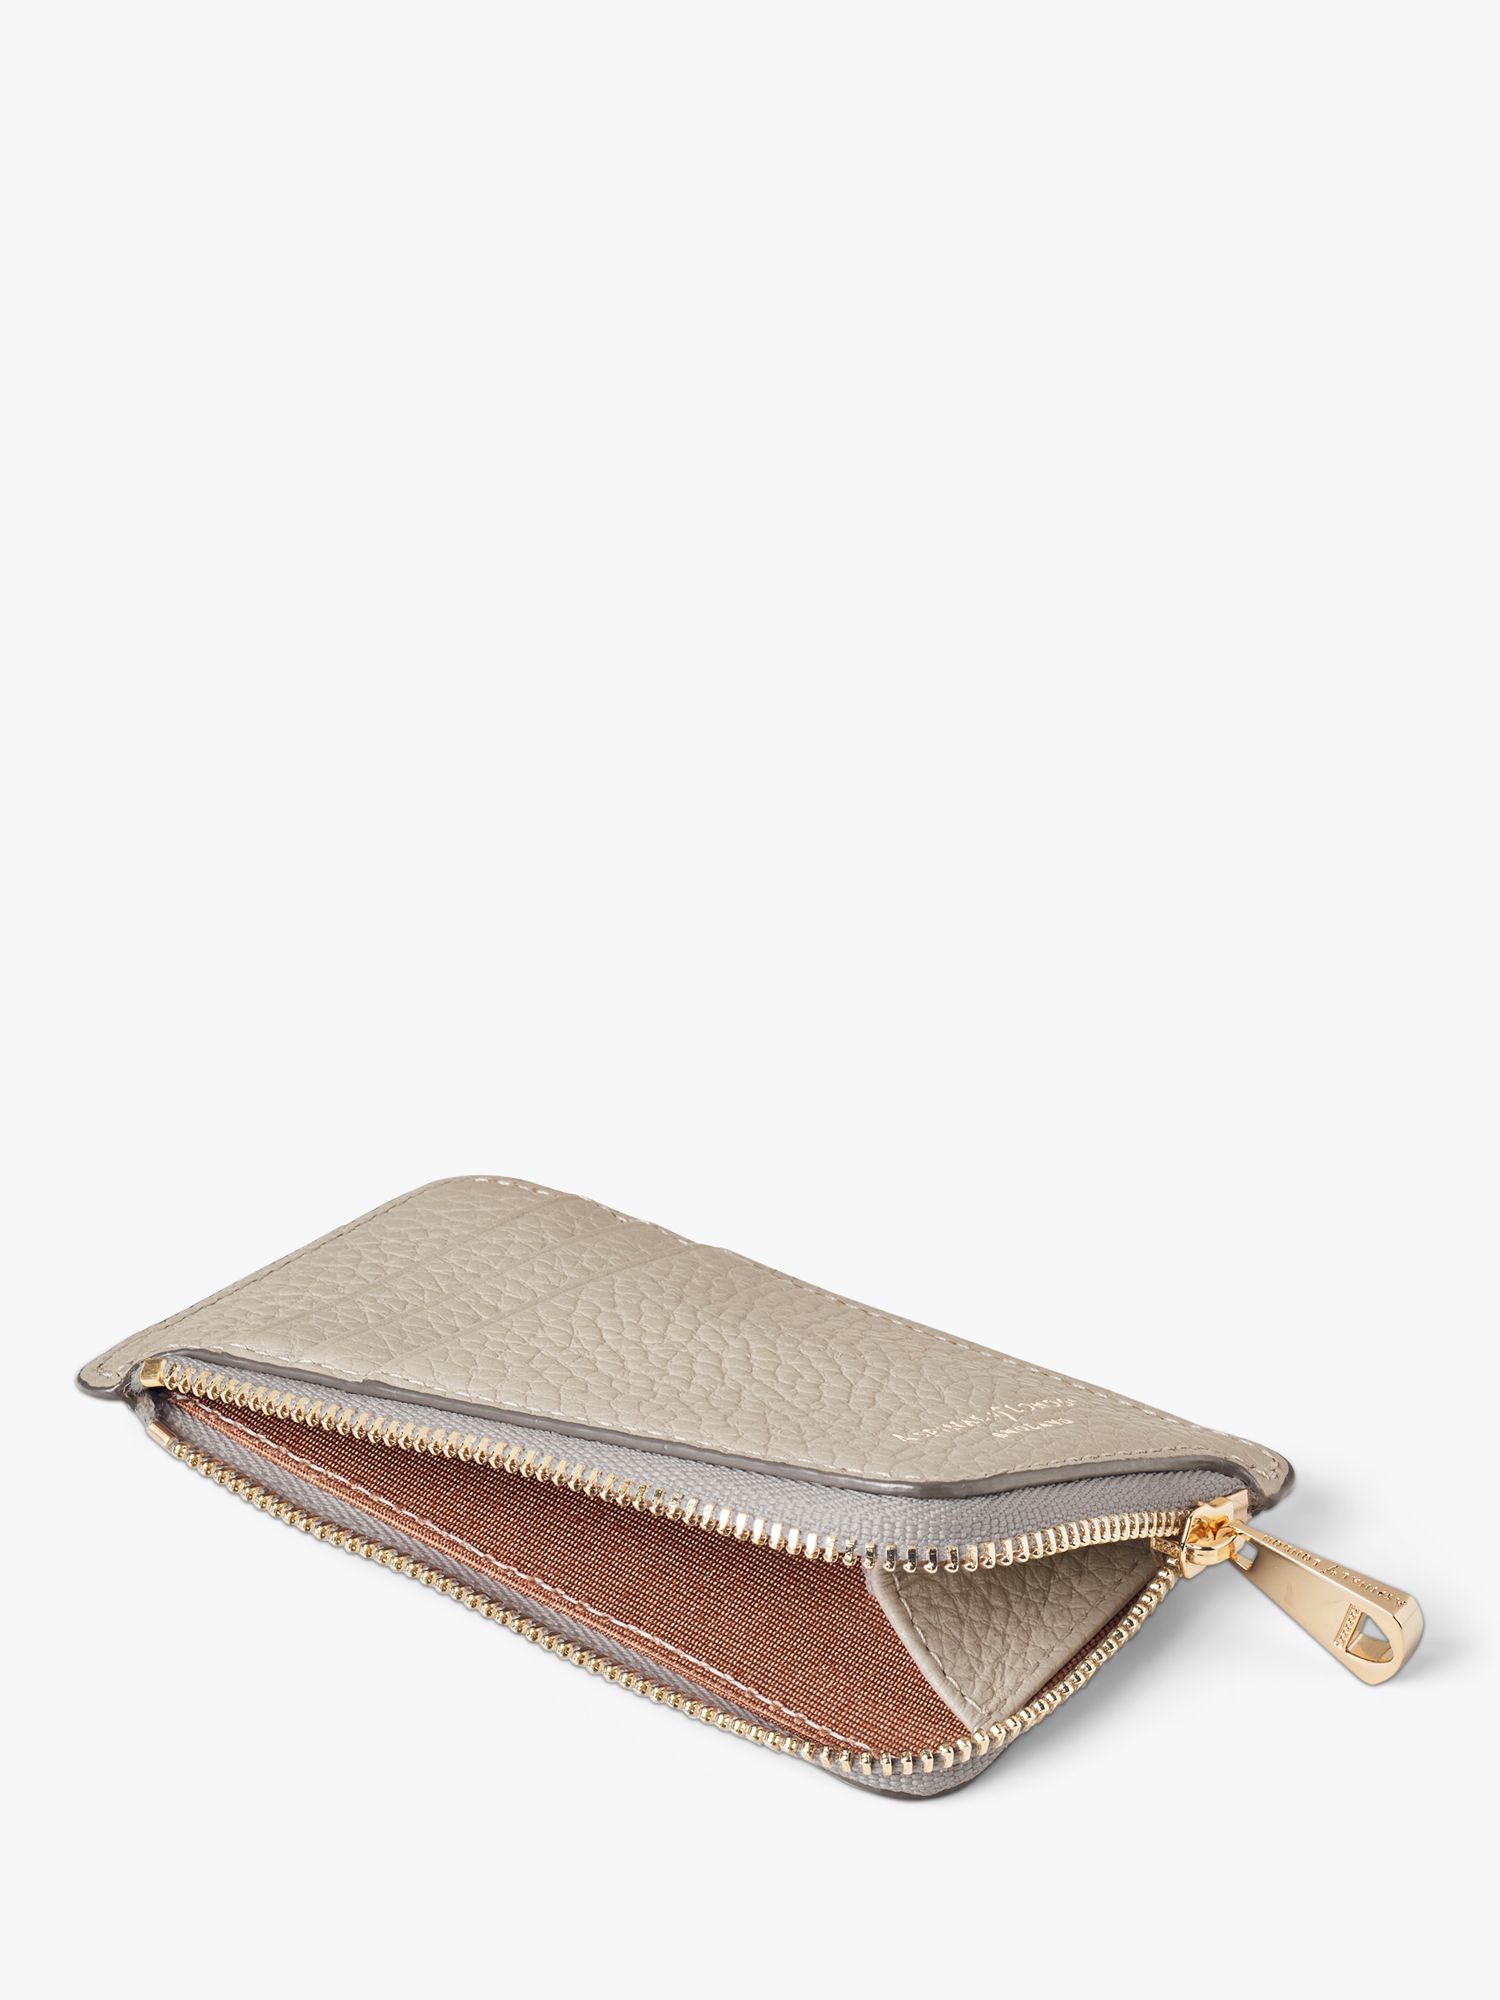 Aspinal of London Pebble Leather Zipped Coin and Card Holder, Dove Grey